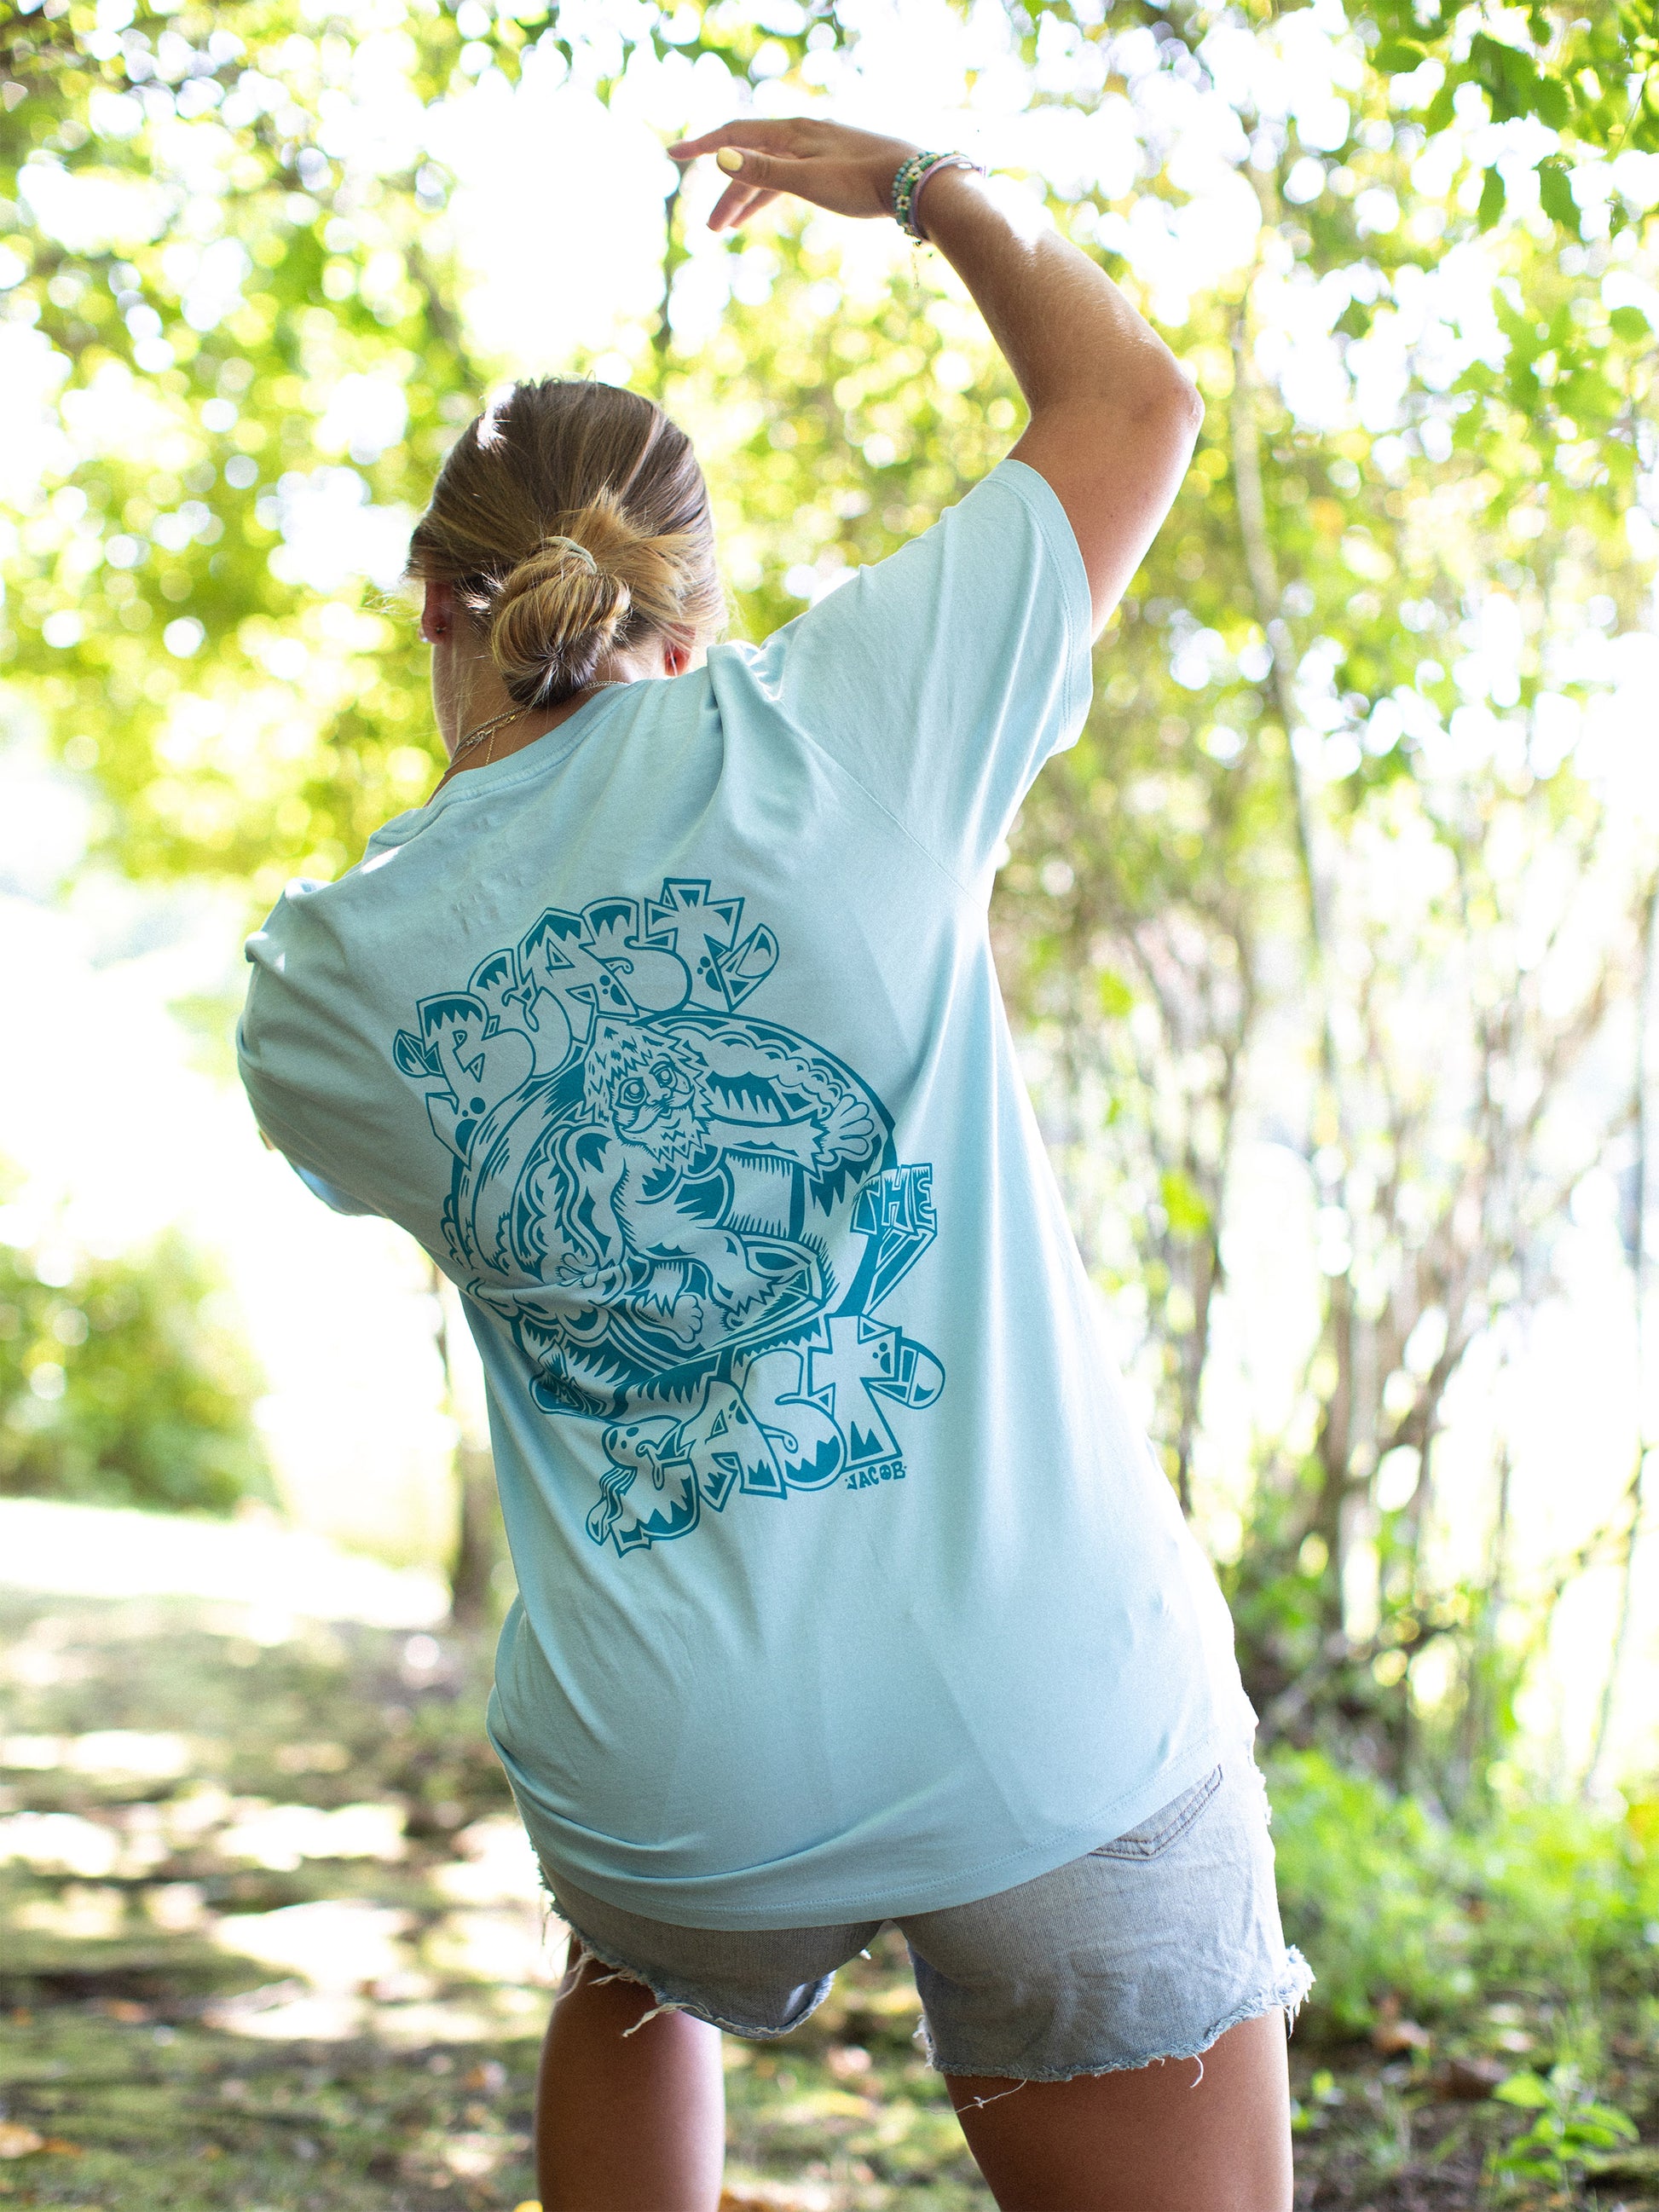 An outdoors photograph of a woman wearing a light blue t-shirt showcasing a large, detailed graphic print in a contrasting darker blue on the back. The print features bold text that reads "Beast of the East" and an intricate design featuring Samson the Legendary Surfing Sasquatch.